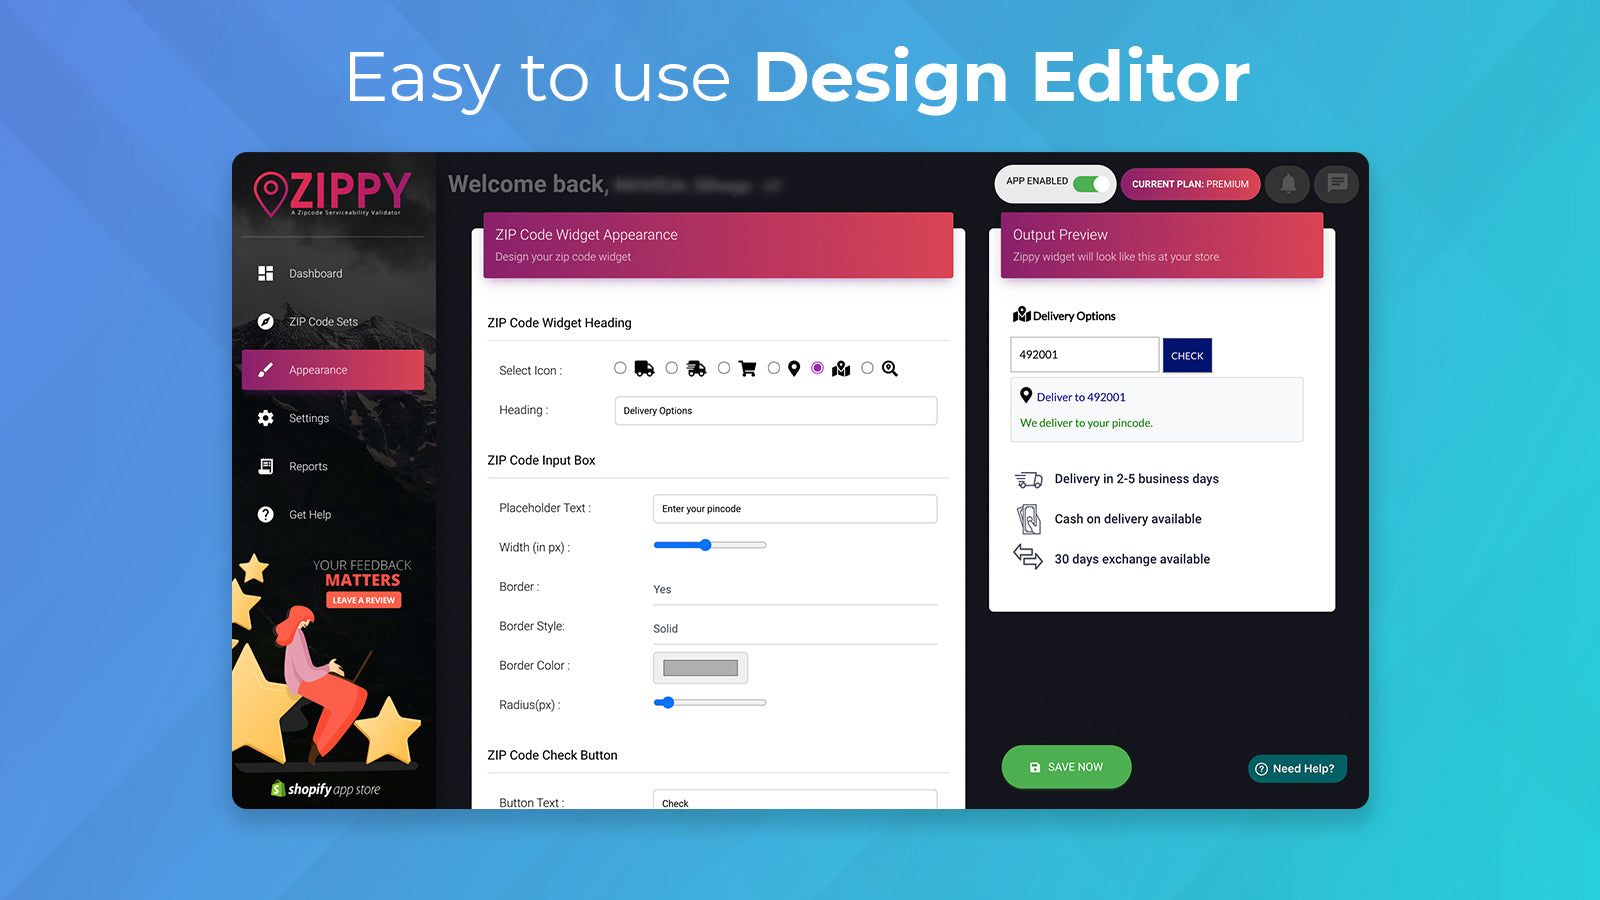 Easy to use Design Editor